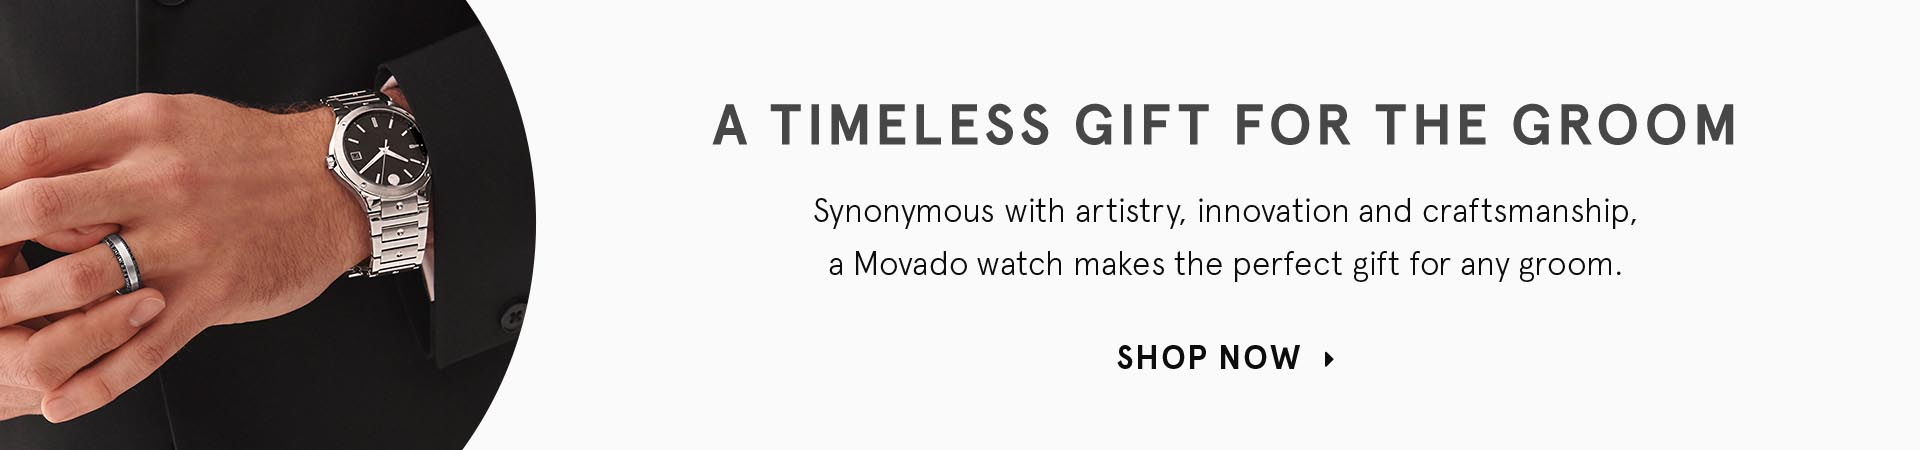 A timeless gift for the groom. Explore Movado watches.